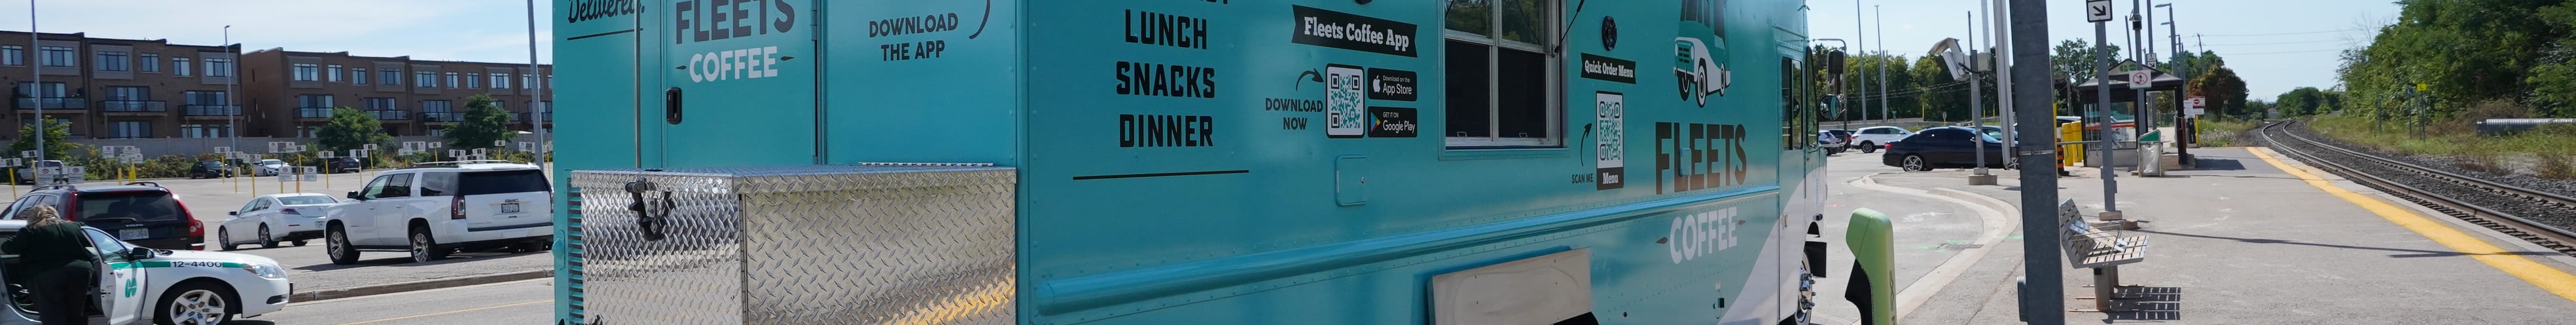 Fleets Coffee mobile food and beverage truck.